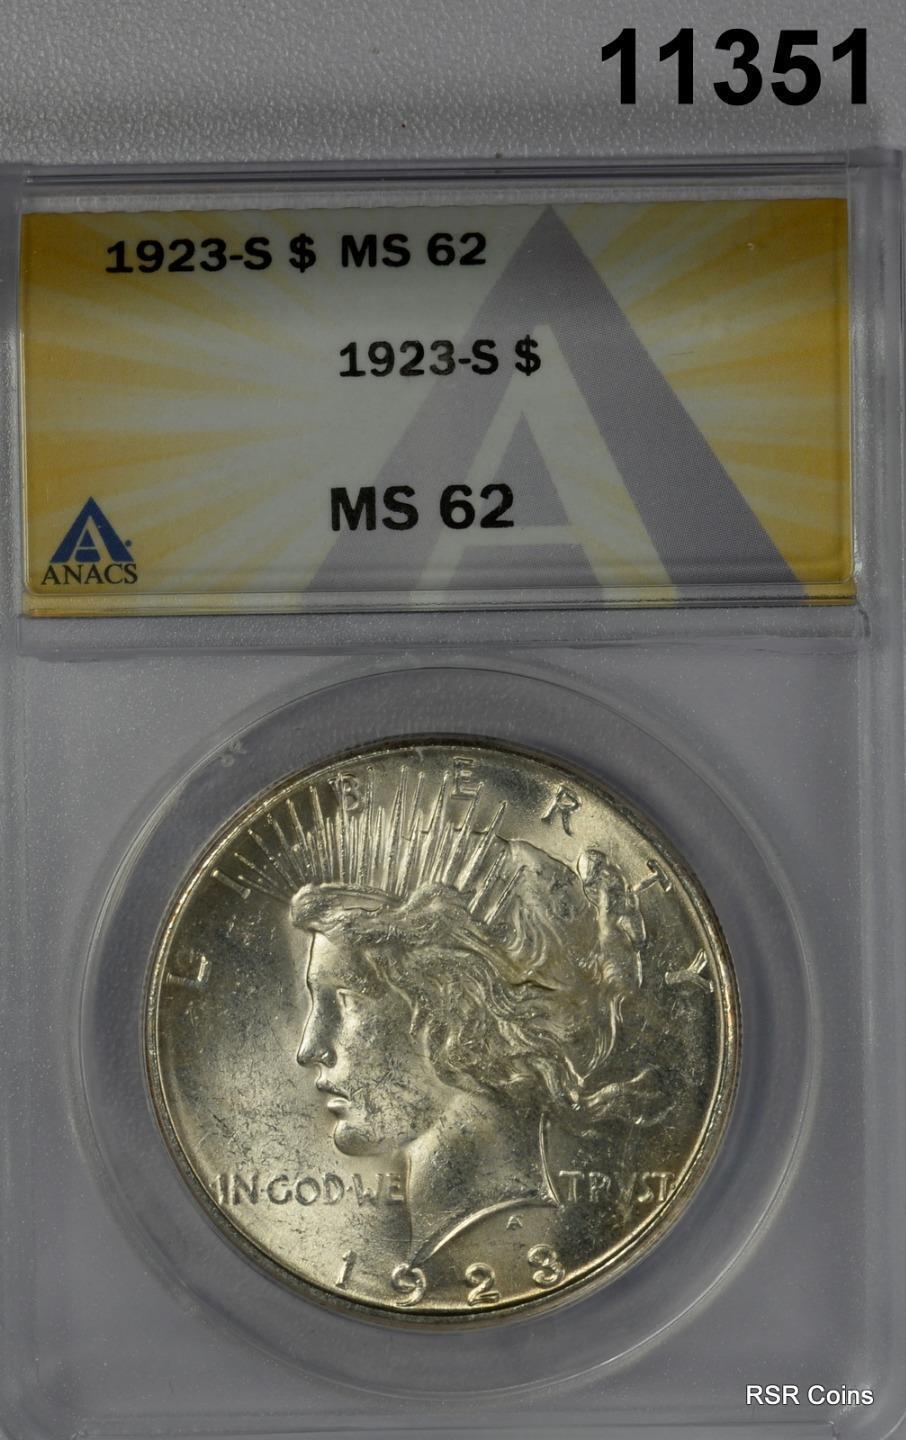 1923 S PEACE SILVER DOLLAR ANACS CERTIFIED MS62 #11351